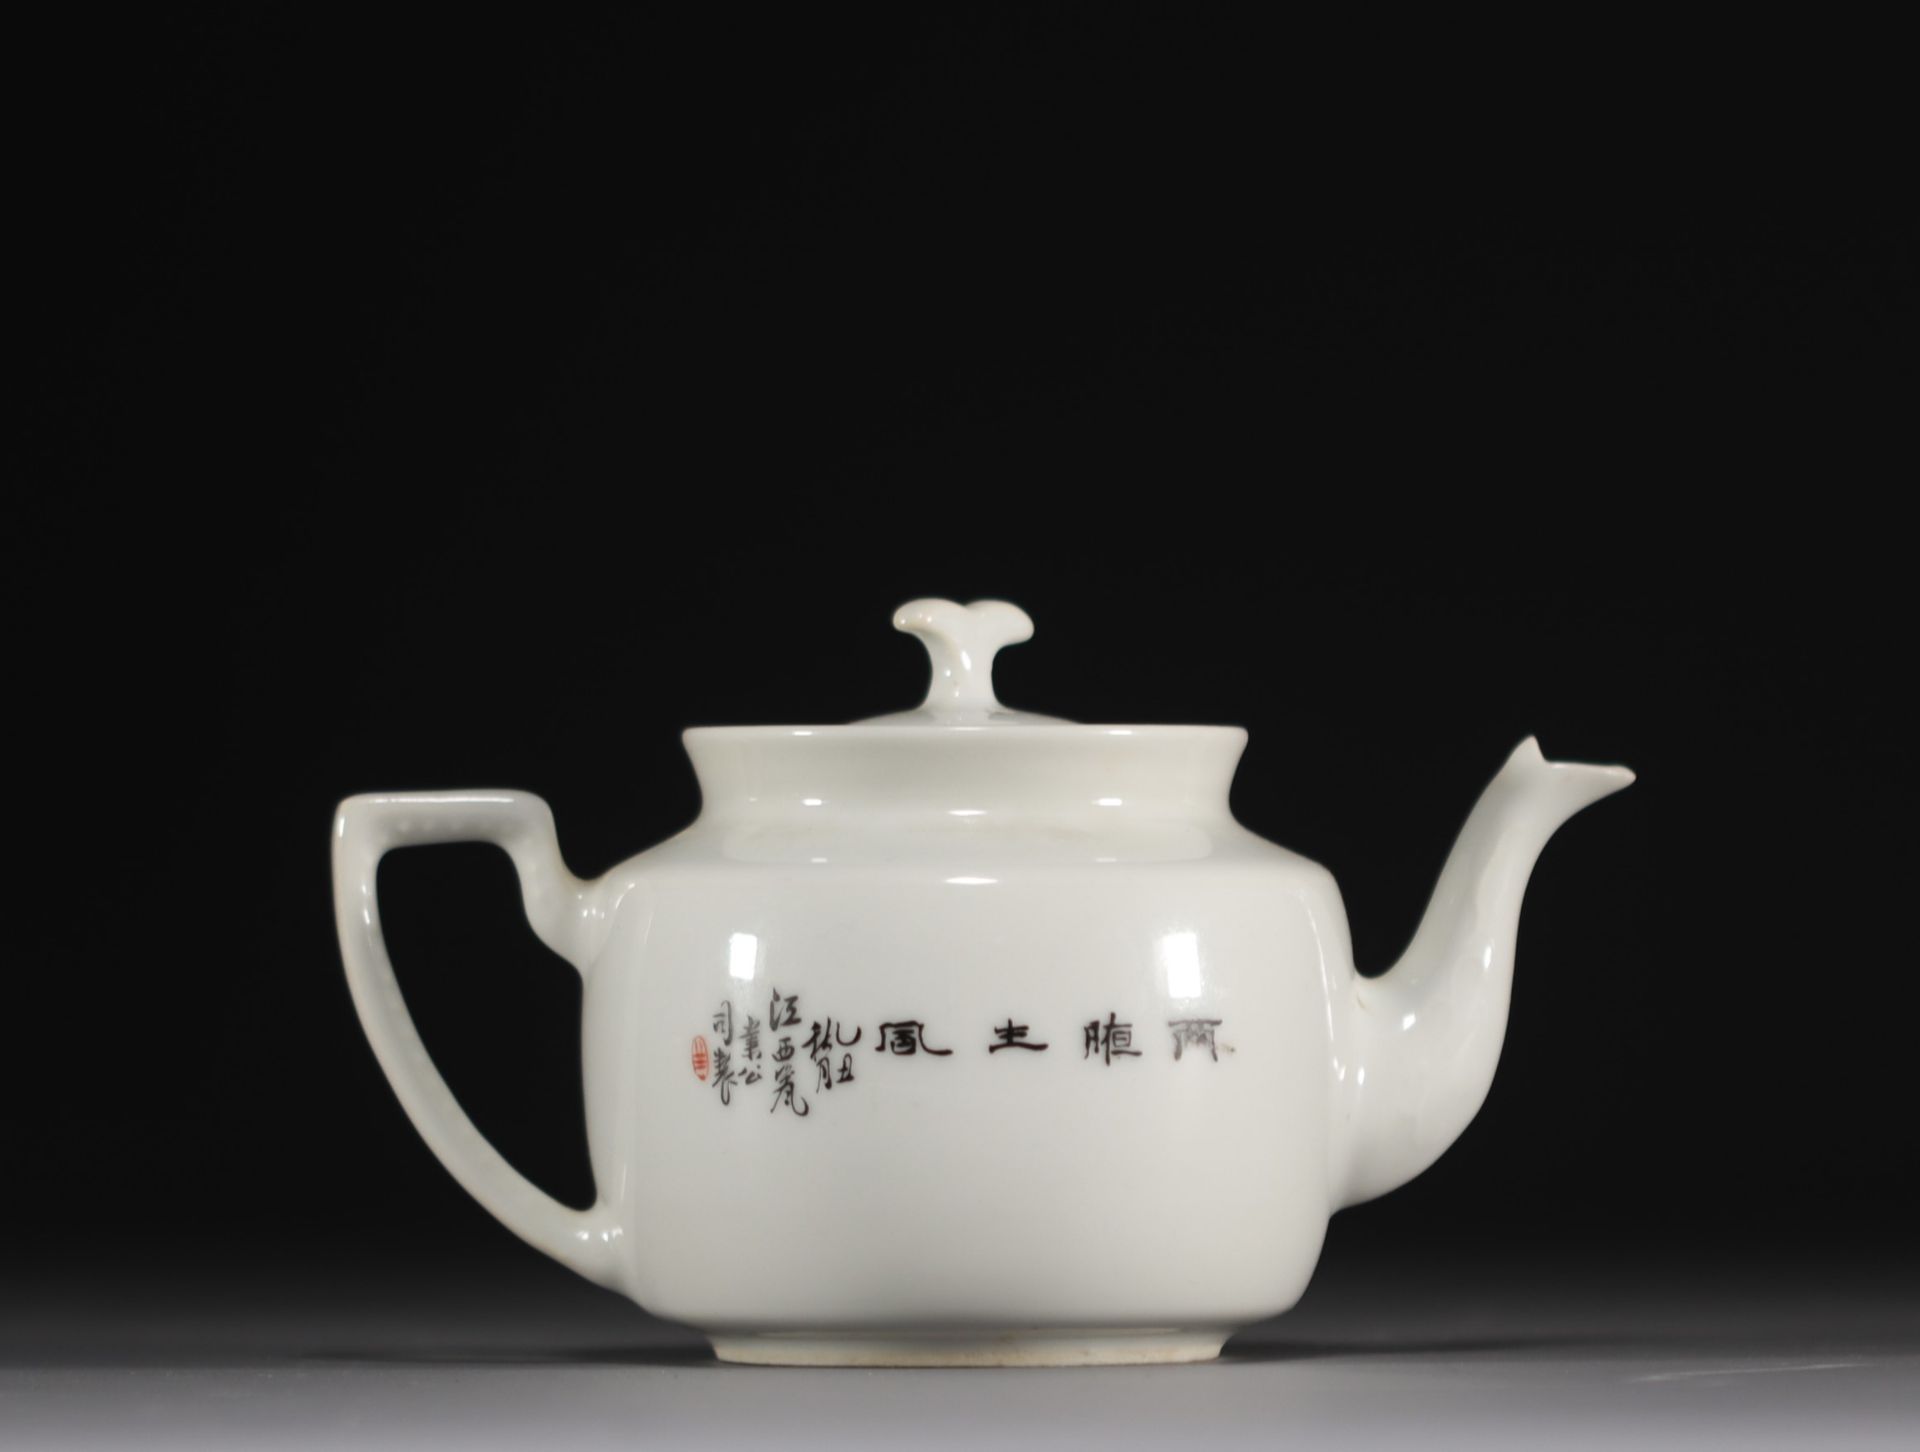 China - Jiangxi porcelain teapot with floral decoration, early 20th century. - Image 3 of 4